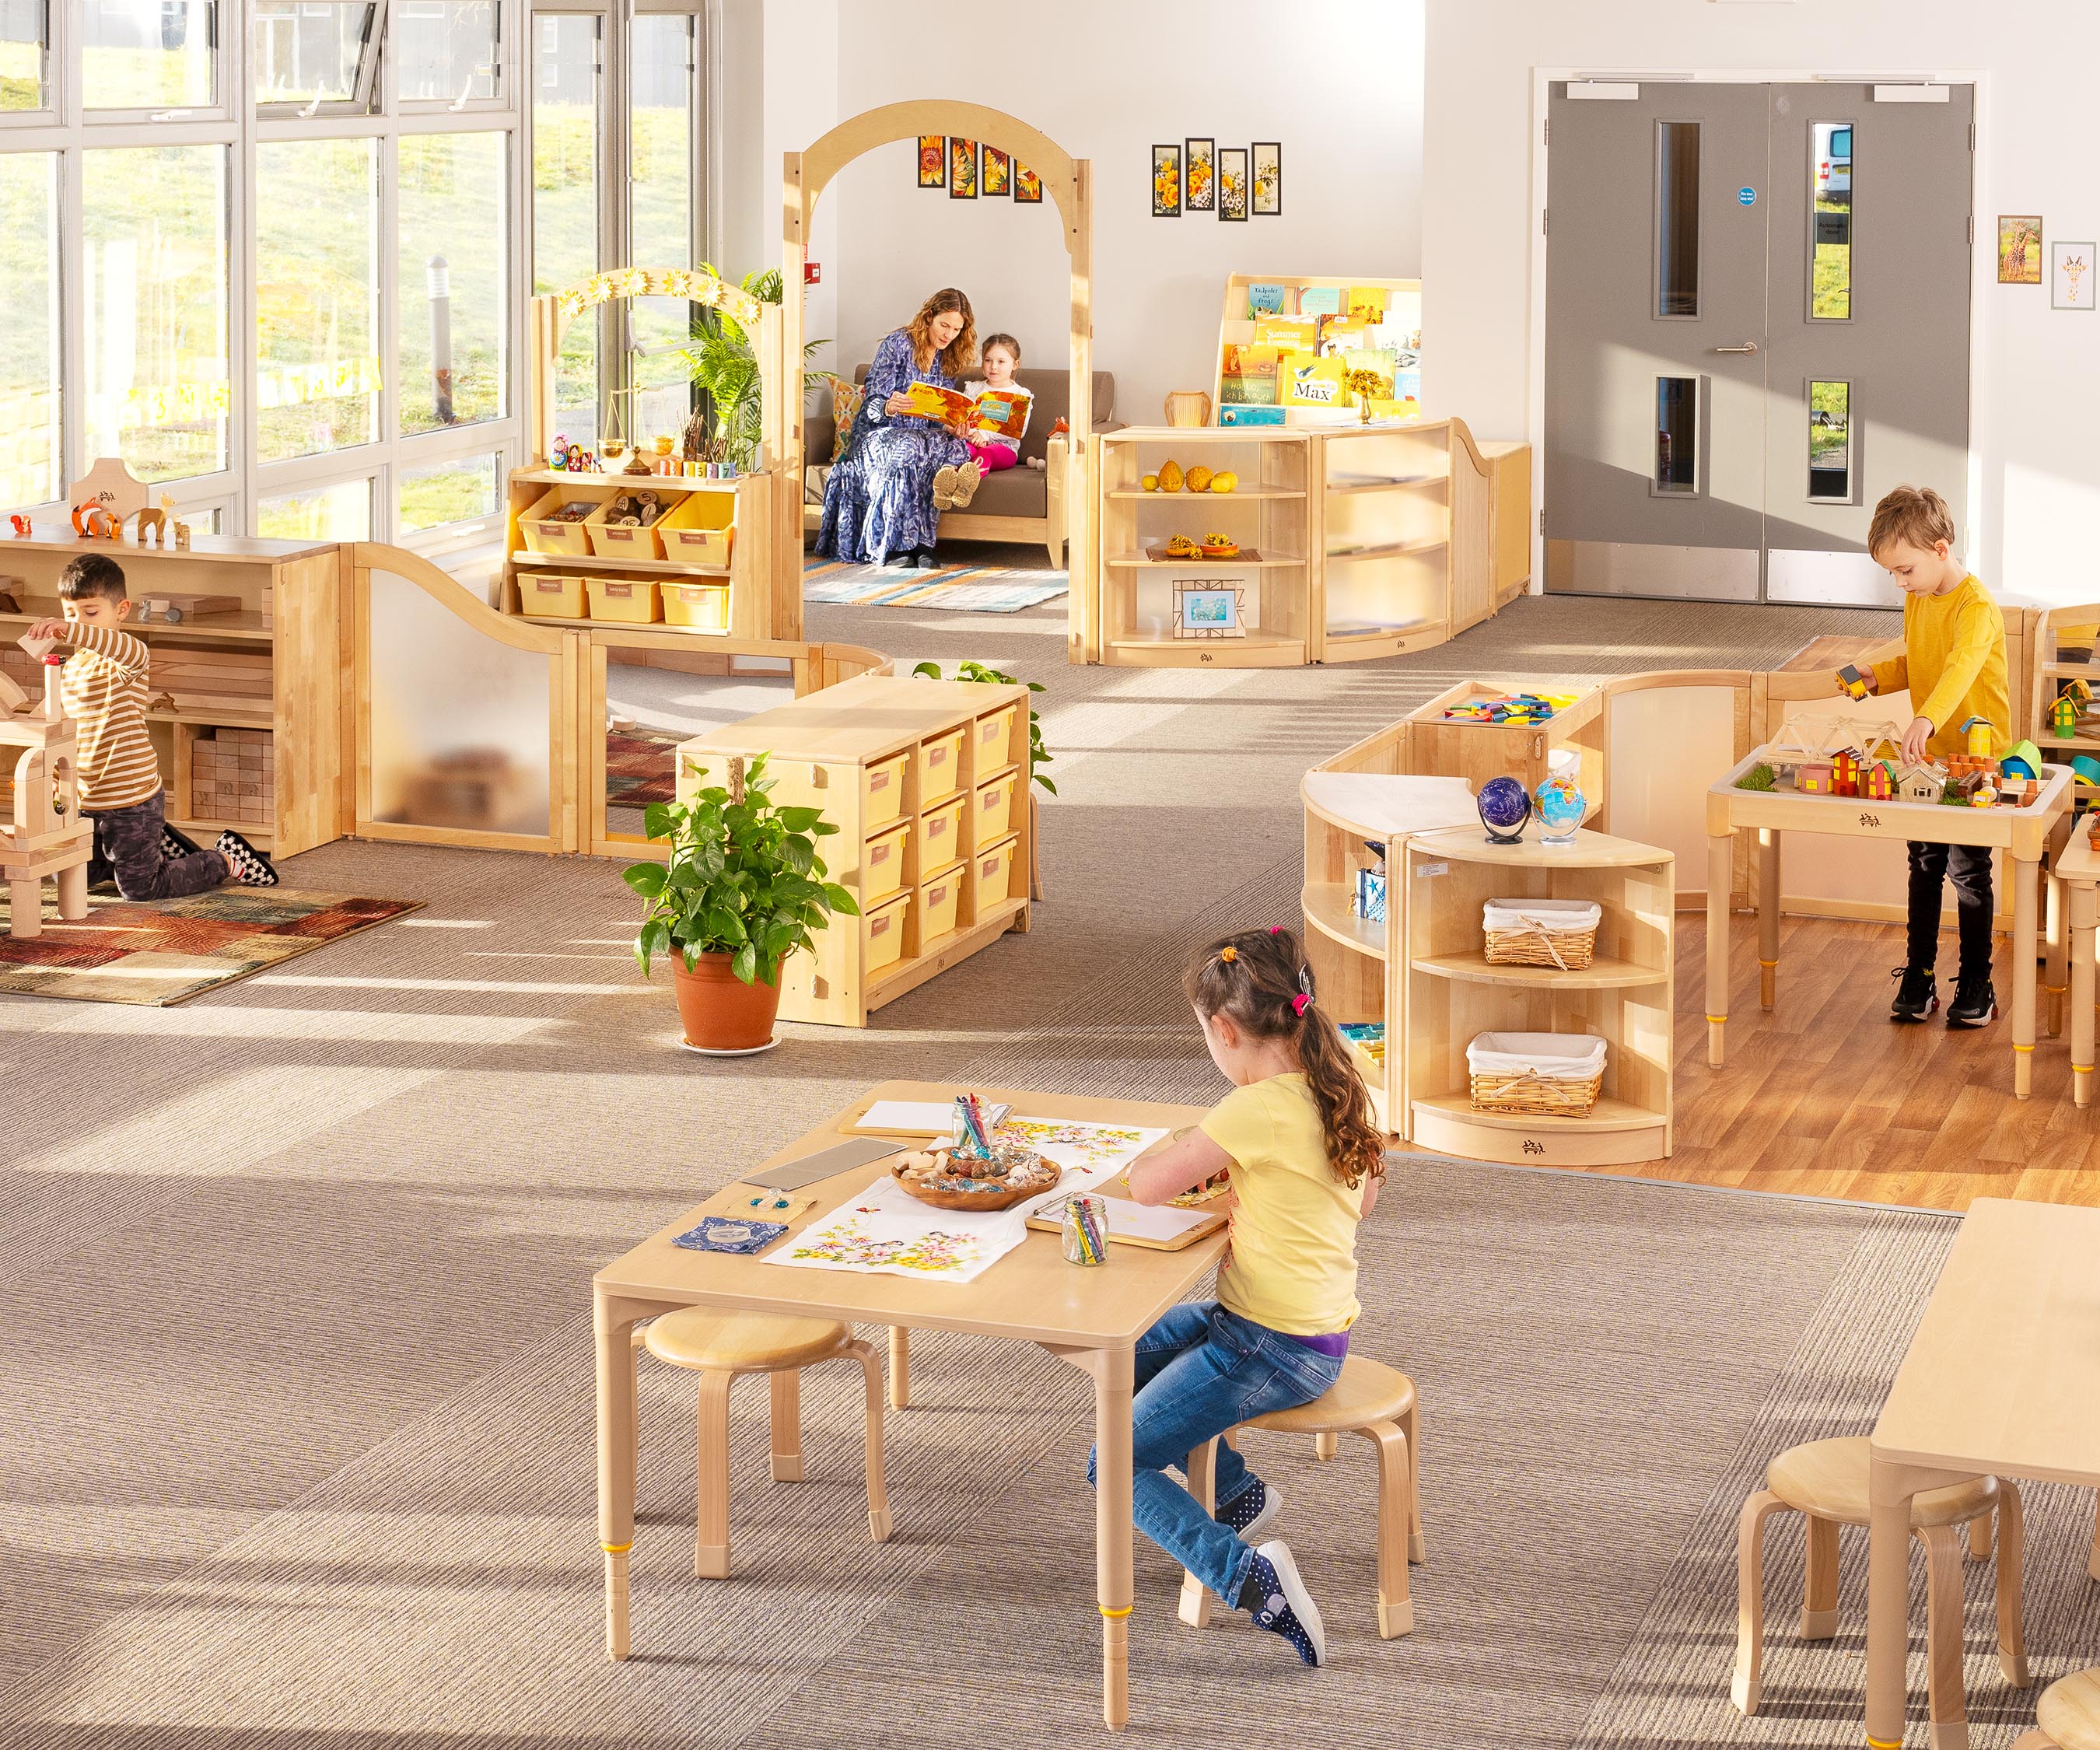 A reception or kindergarten classroom set up with natural wood furniture to create the EYFS areas